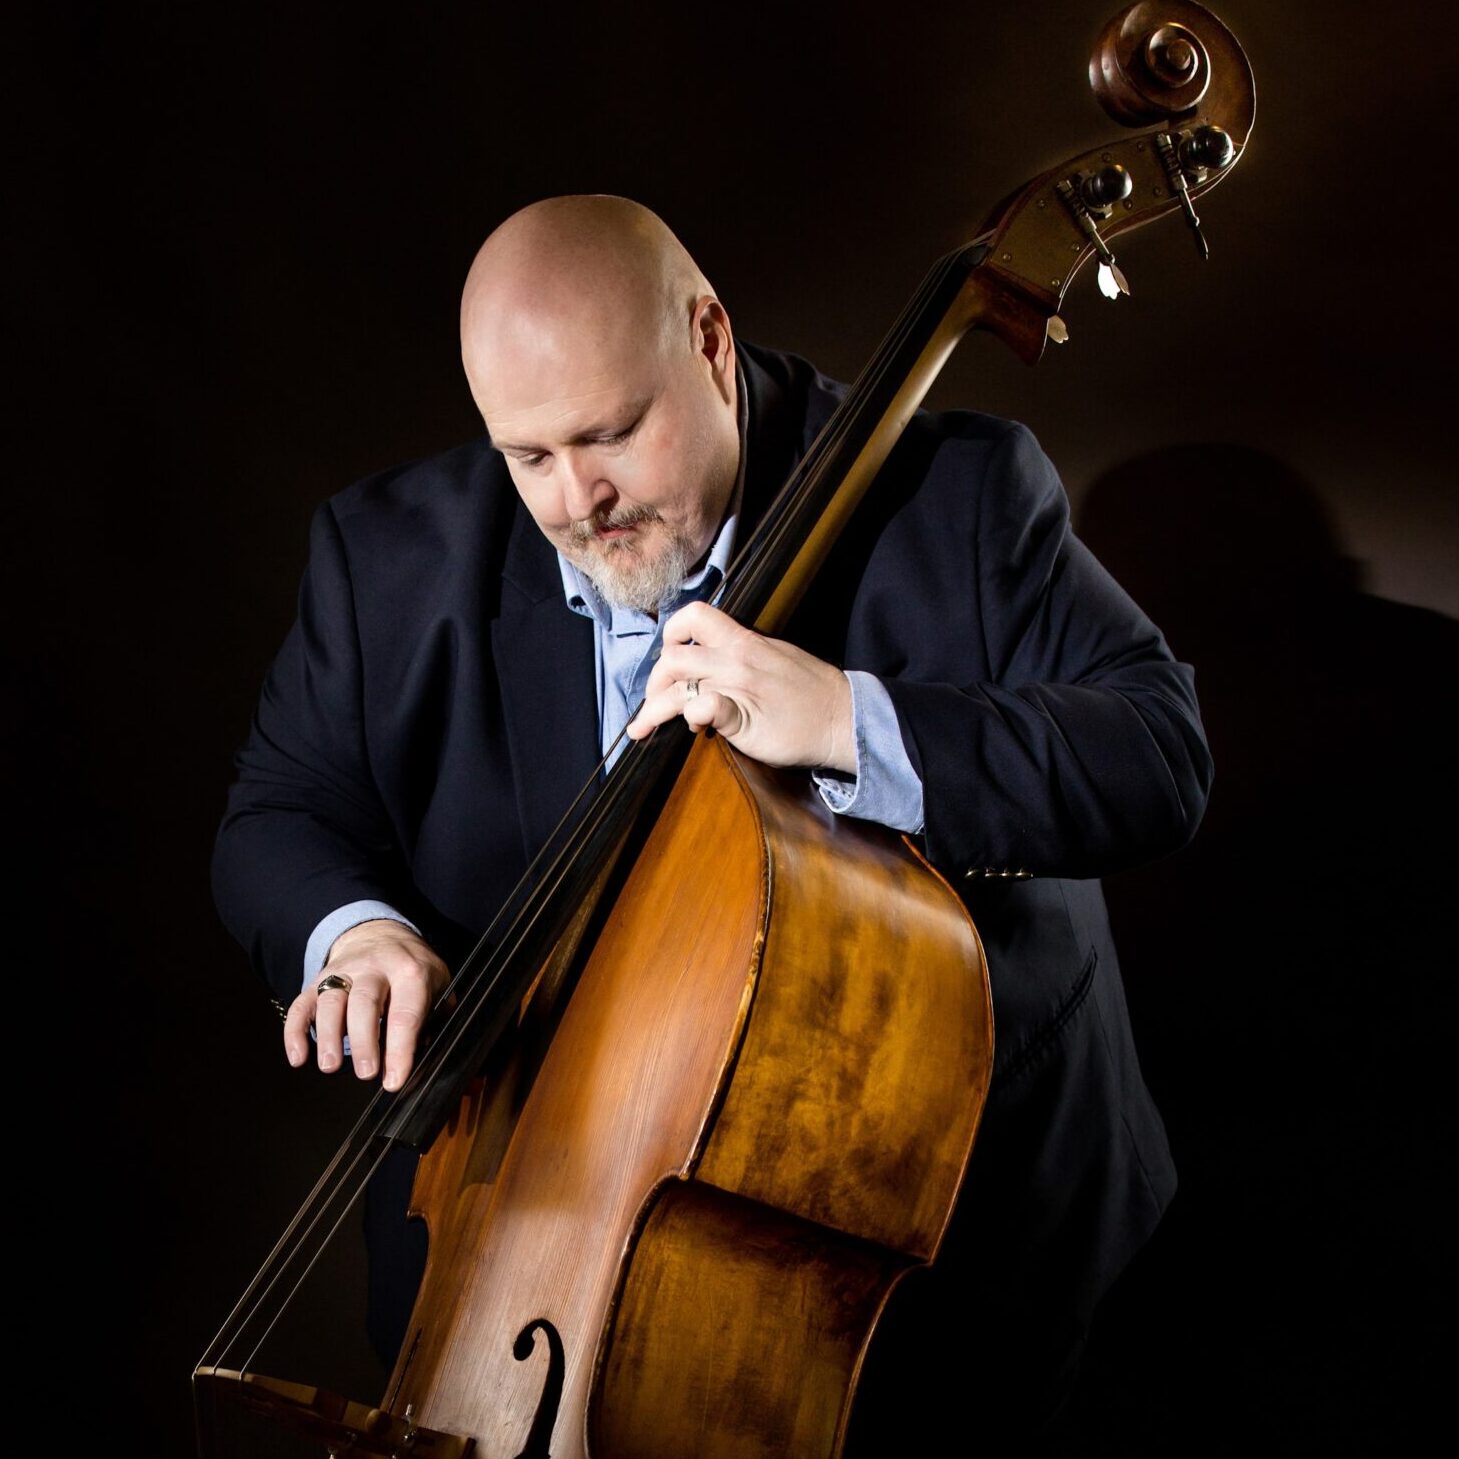 REMIC Artist Chris Hasty, double bass player